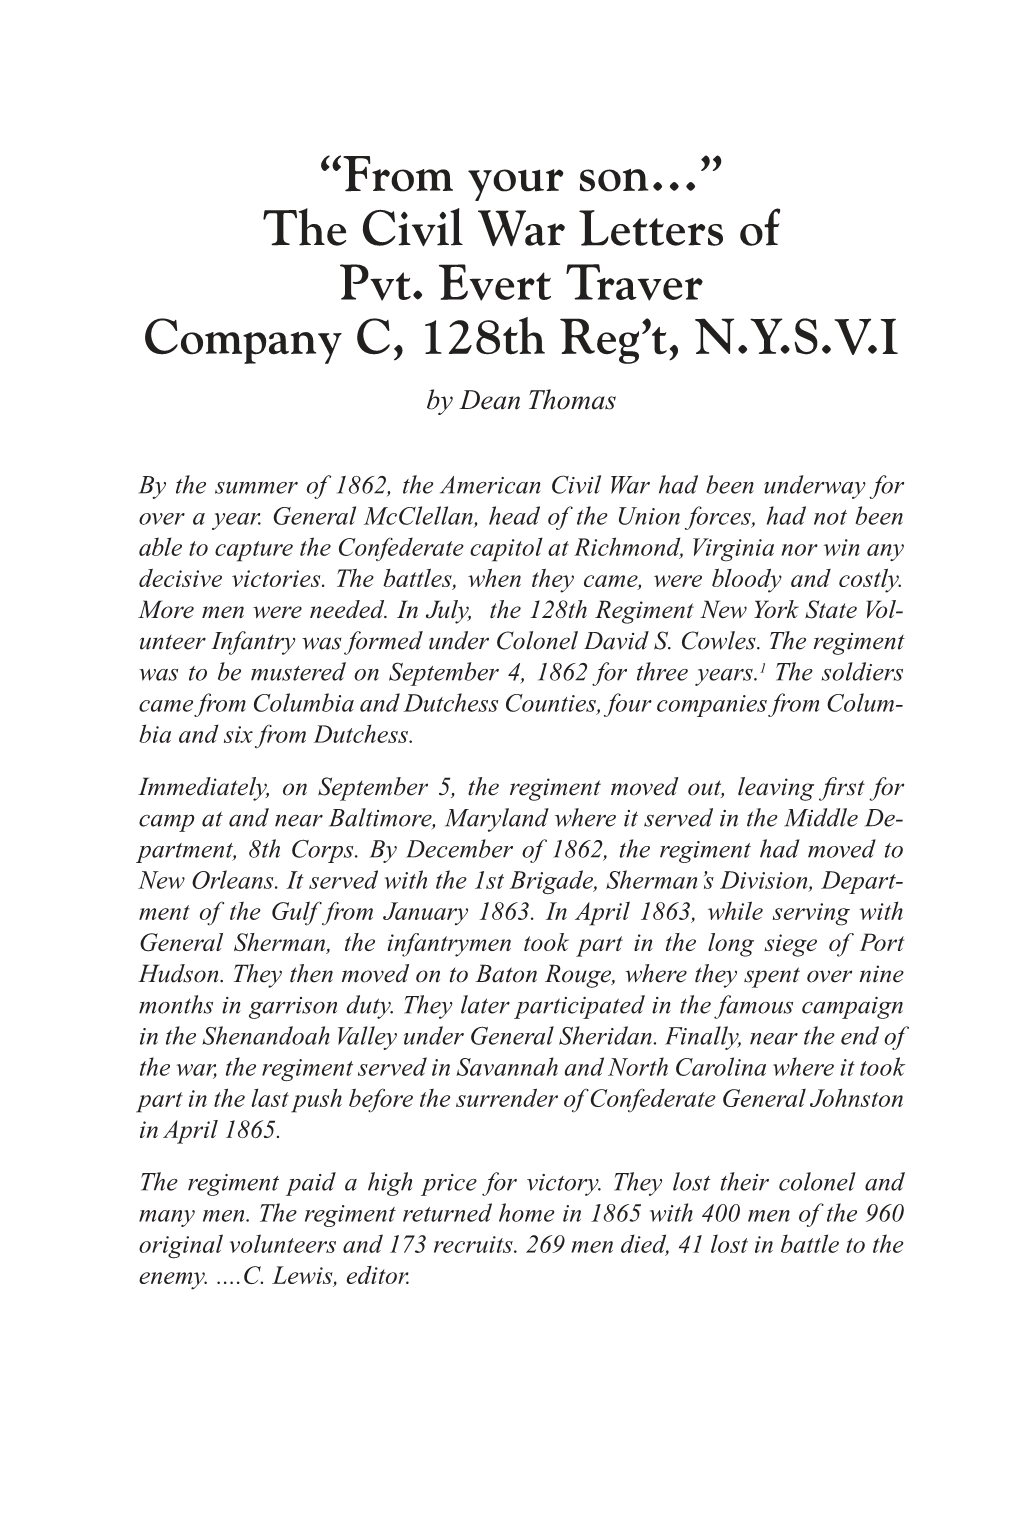 The Civil War Letters of Pvt. Evert Traver Company C, 128Th Reg't